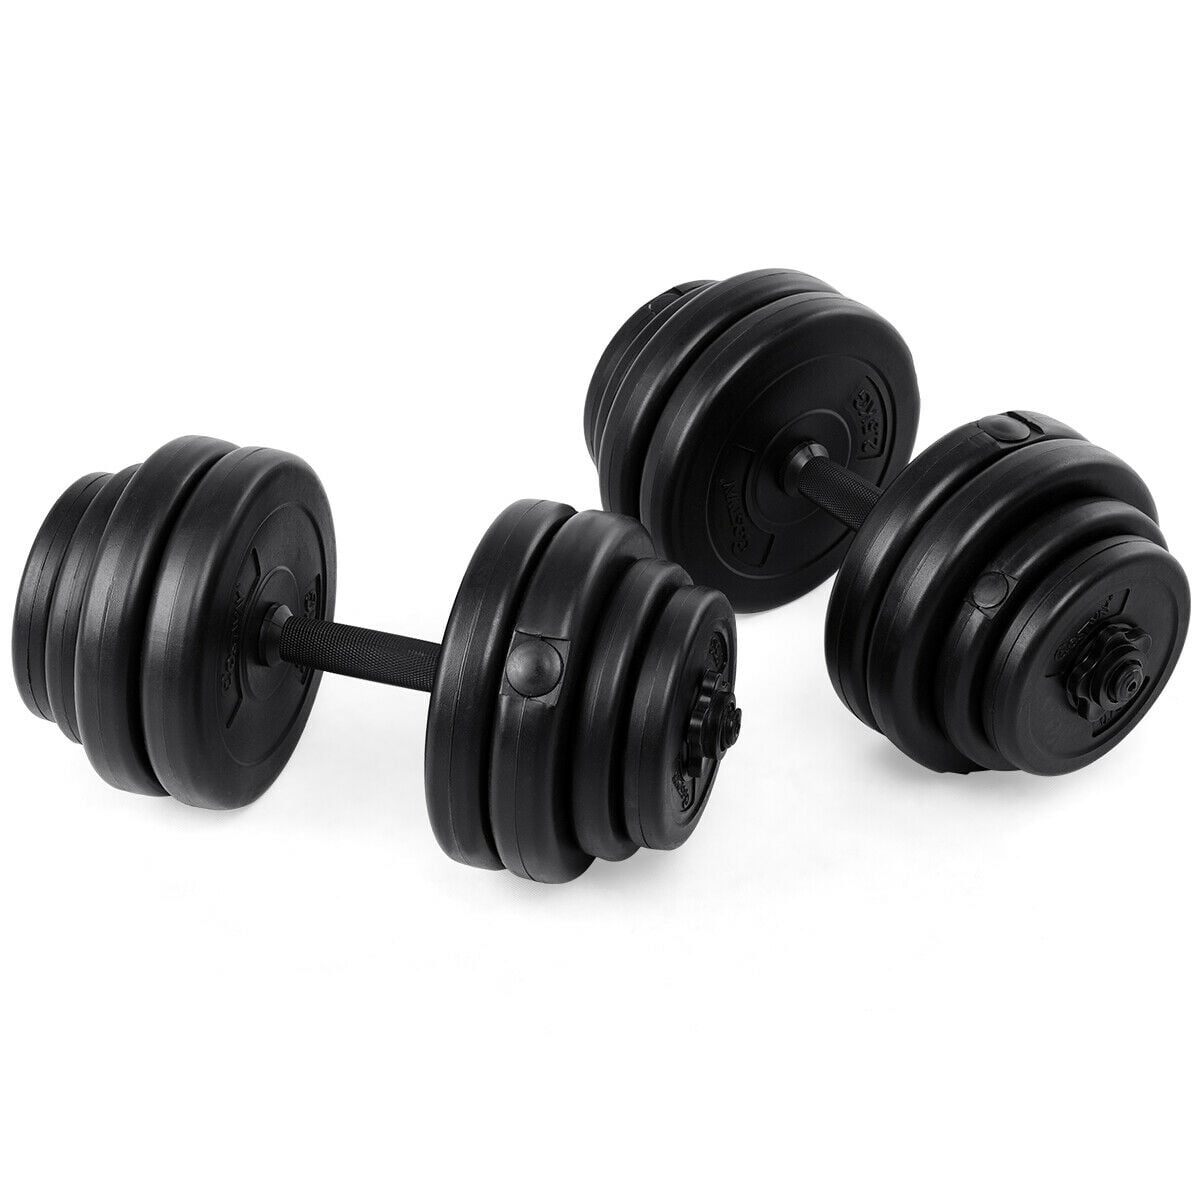 Yes4All 52.5LB Adjustable Dumbbell Weights Cast Iron Chrome Handle SINGLE ONLY 